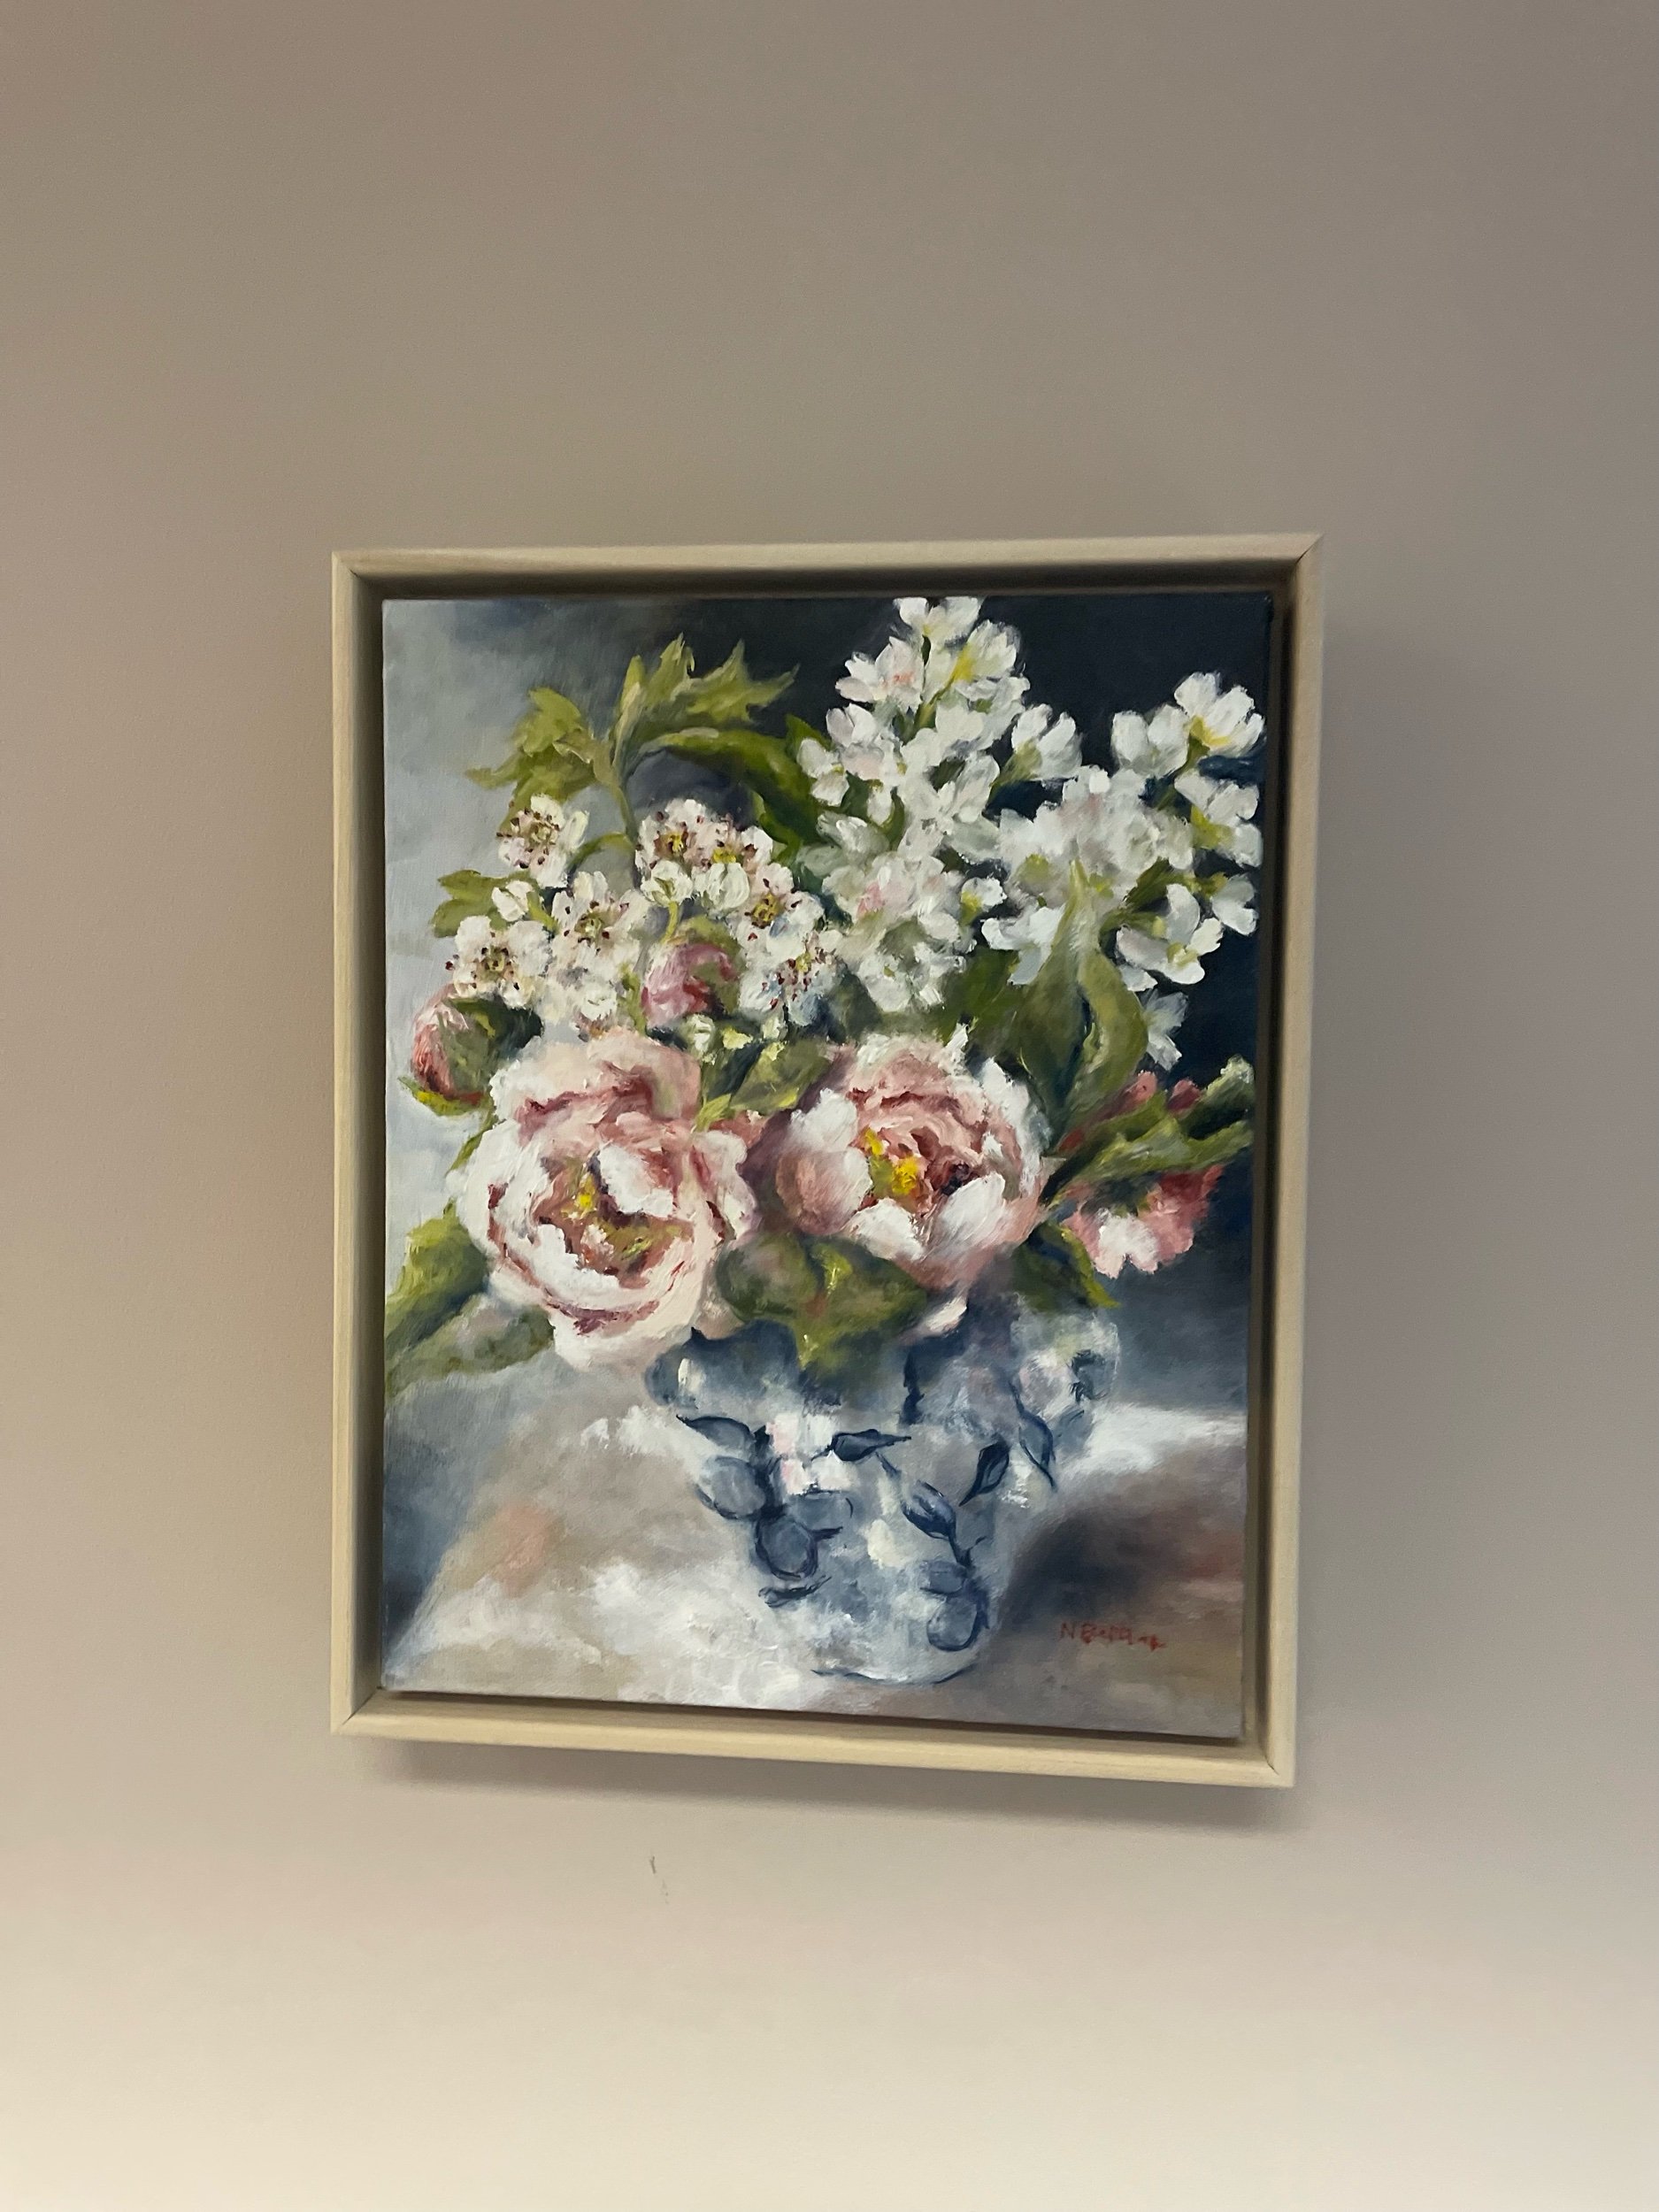  Nina of  Ninabel Designs  painted this piece and donated it to the room. She titled it ‘Grow Into Something Beautiful’ inspired by the quote from the novel,  The Language of Flowers,  by Vanessa Diffenbaugh. The flowers she chose to paint for this p